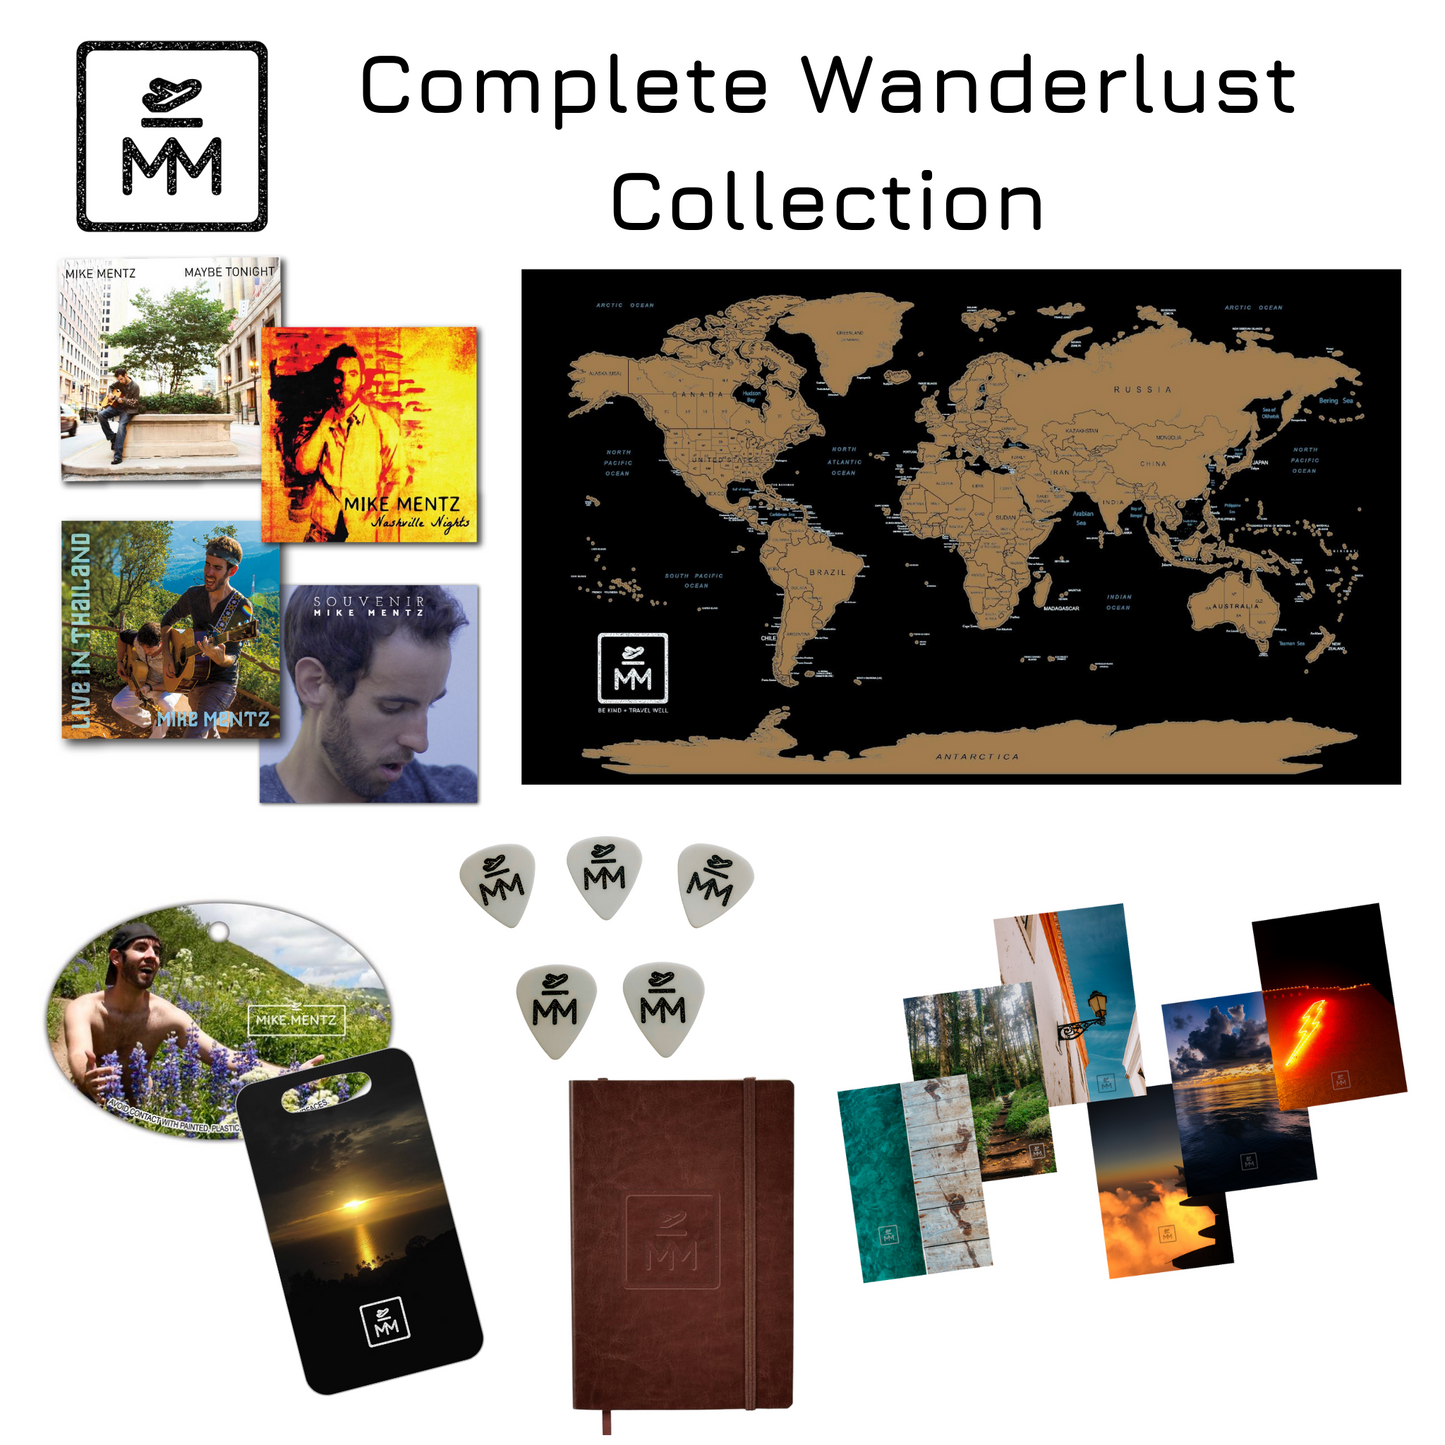 Complete Wanderlust Collection